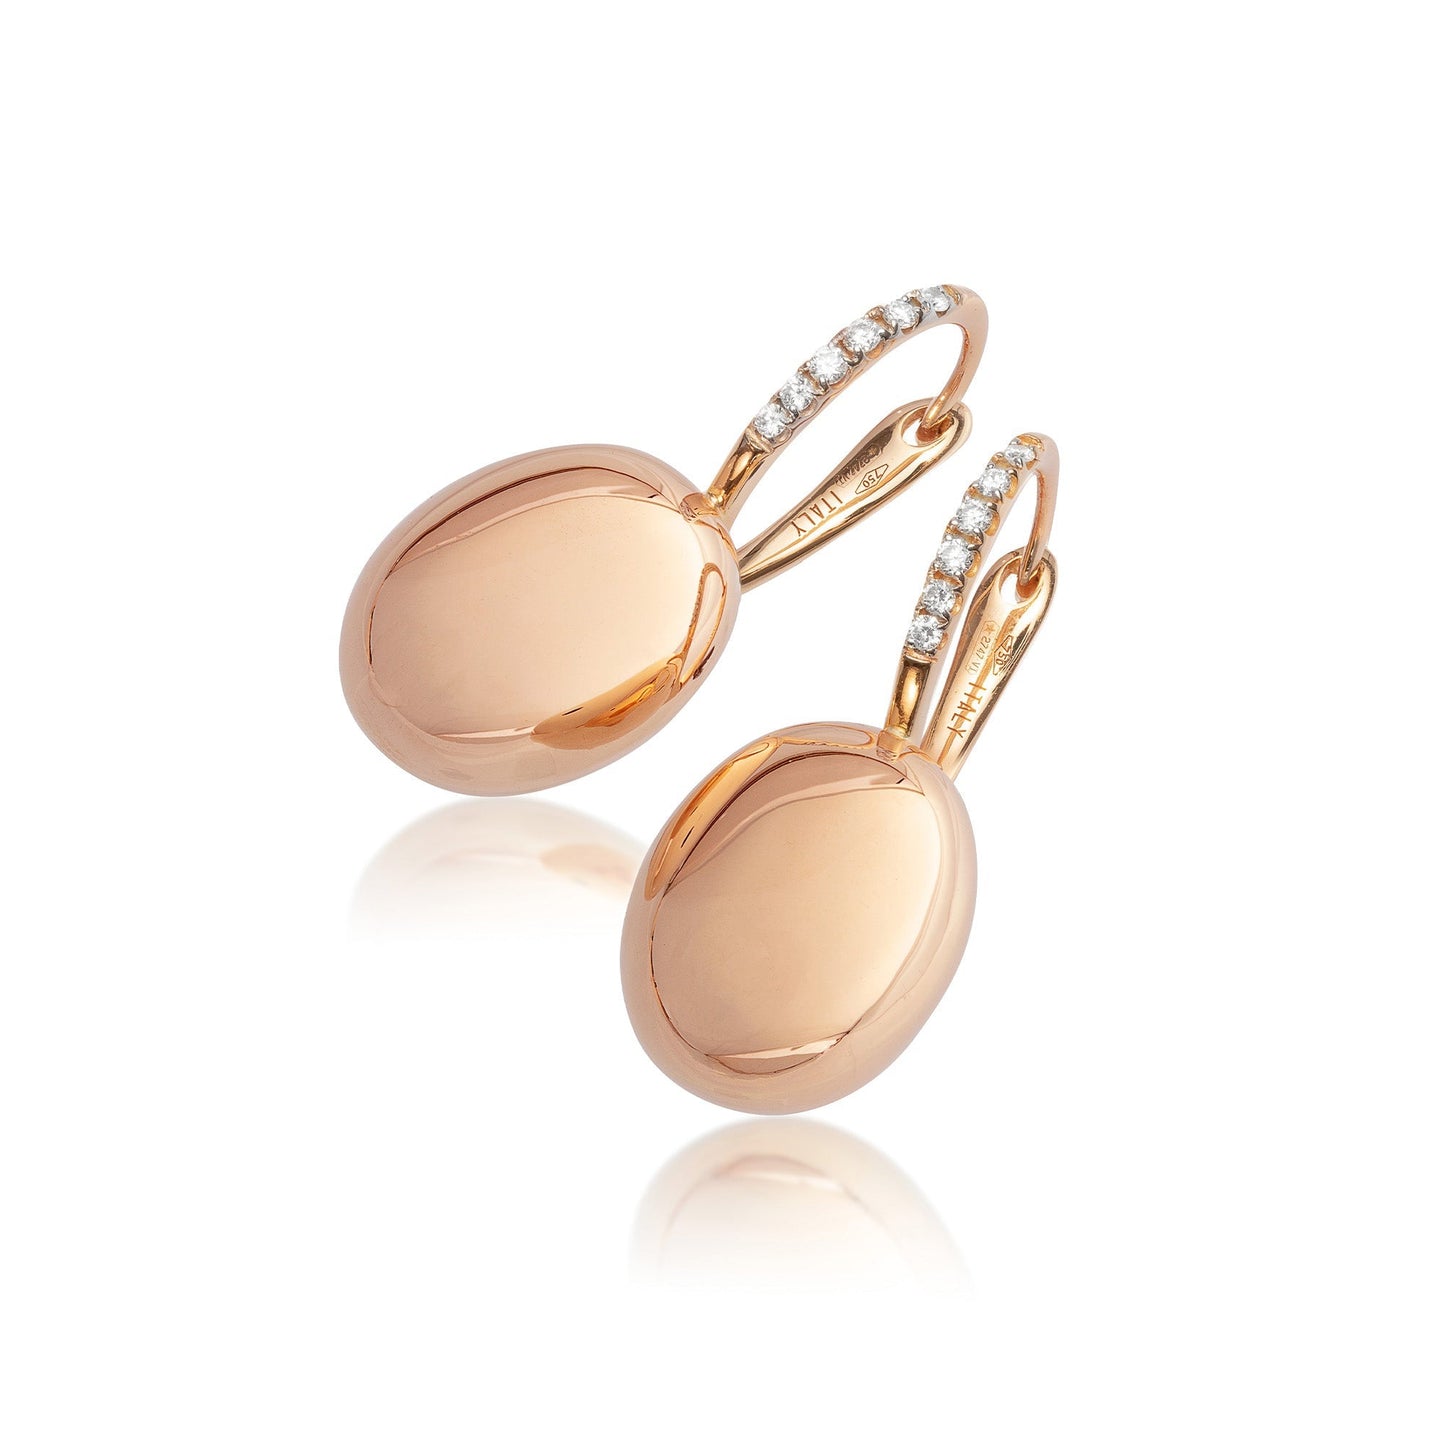 SUNSET "CILIEGINE" ROSE GOLD BOULES AND DIAMONDS DETAILS EARRINGS (MEDIUM)